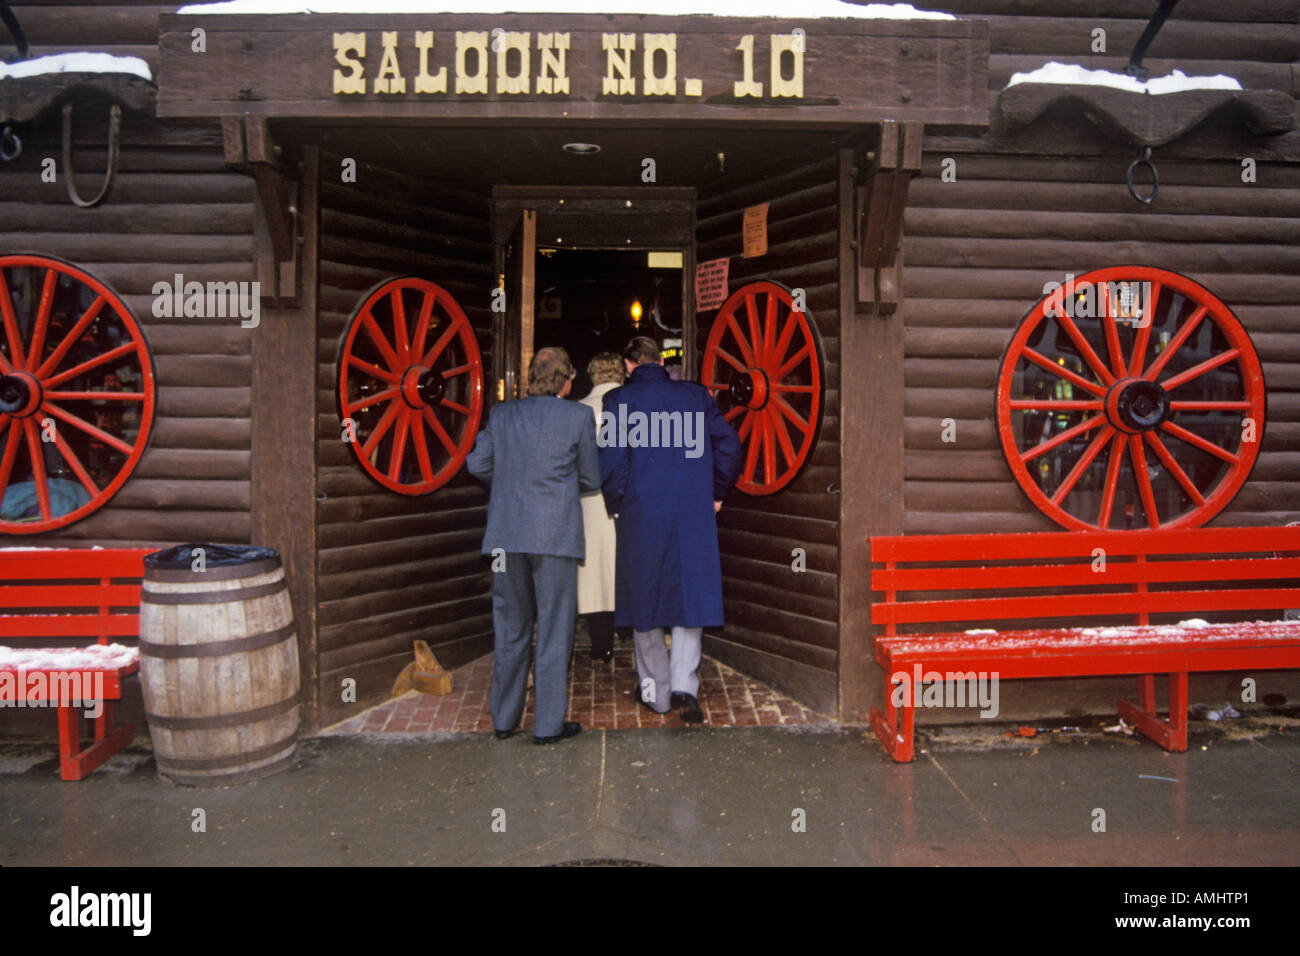 Entrance to Saloon 10 in Gold Rush town of Deadwood SD Stock Photo